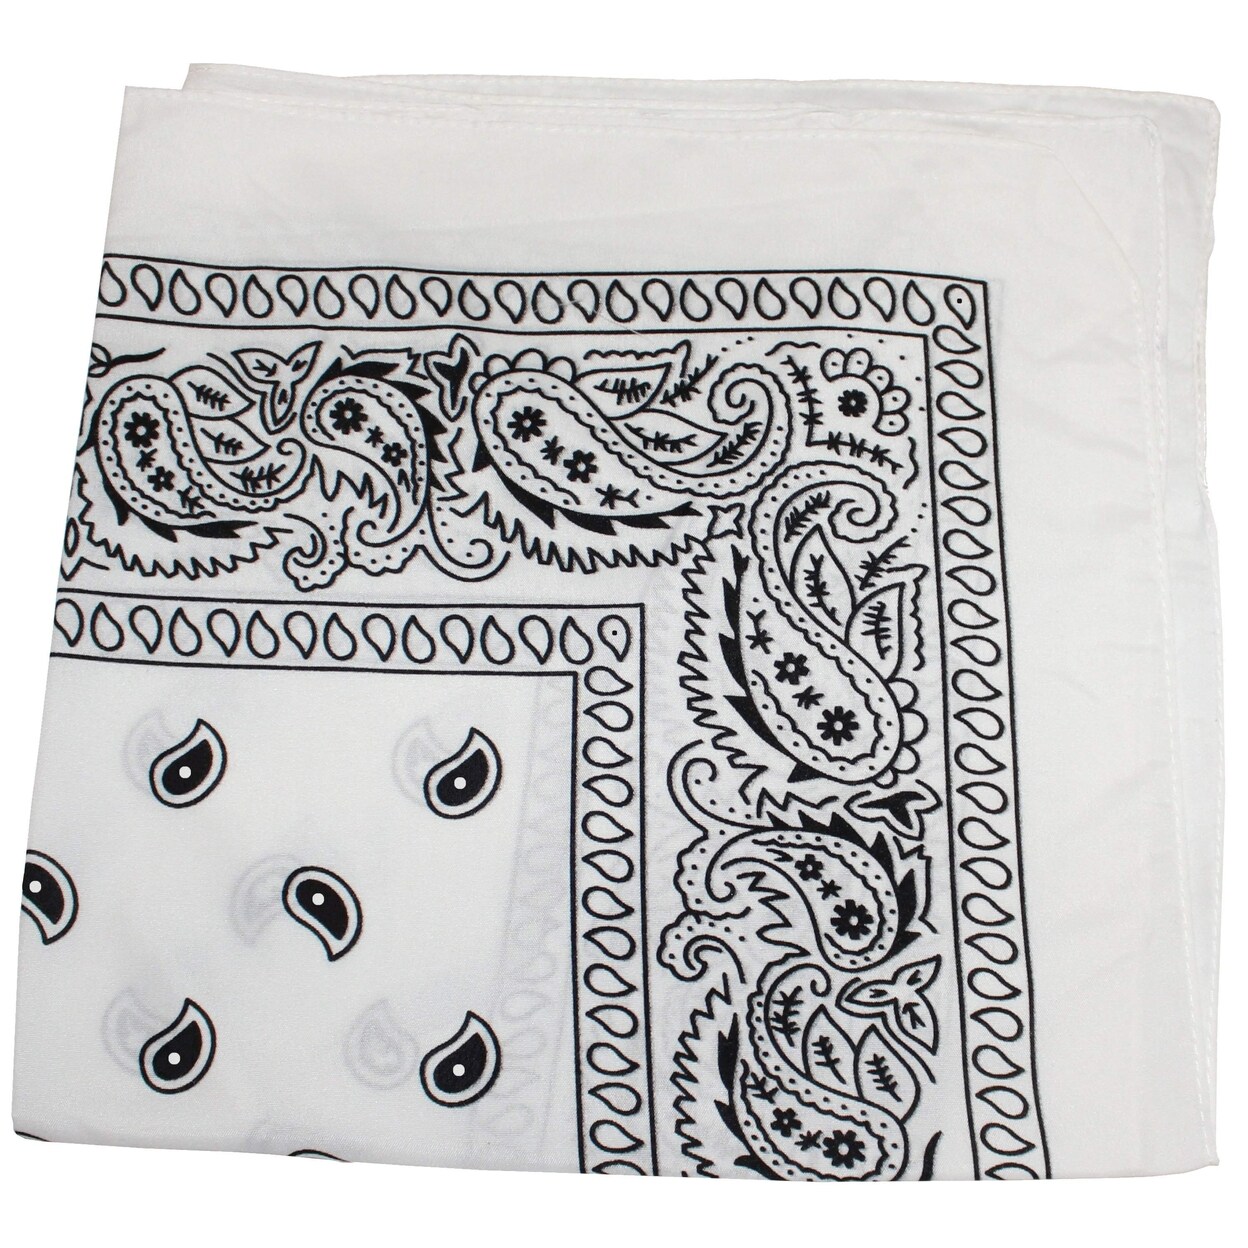 Uni Style Apparel Pack of 30 Polyester 22 x 22 Inch Paisley Printed Bandanas